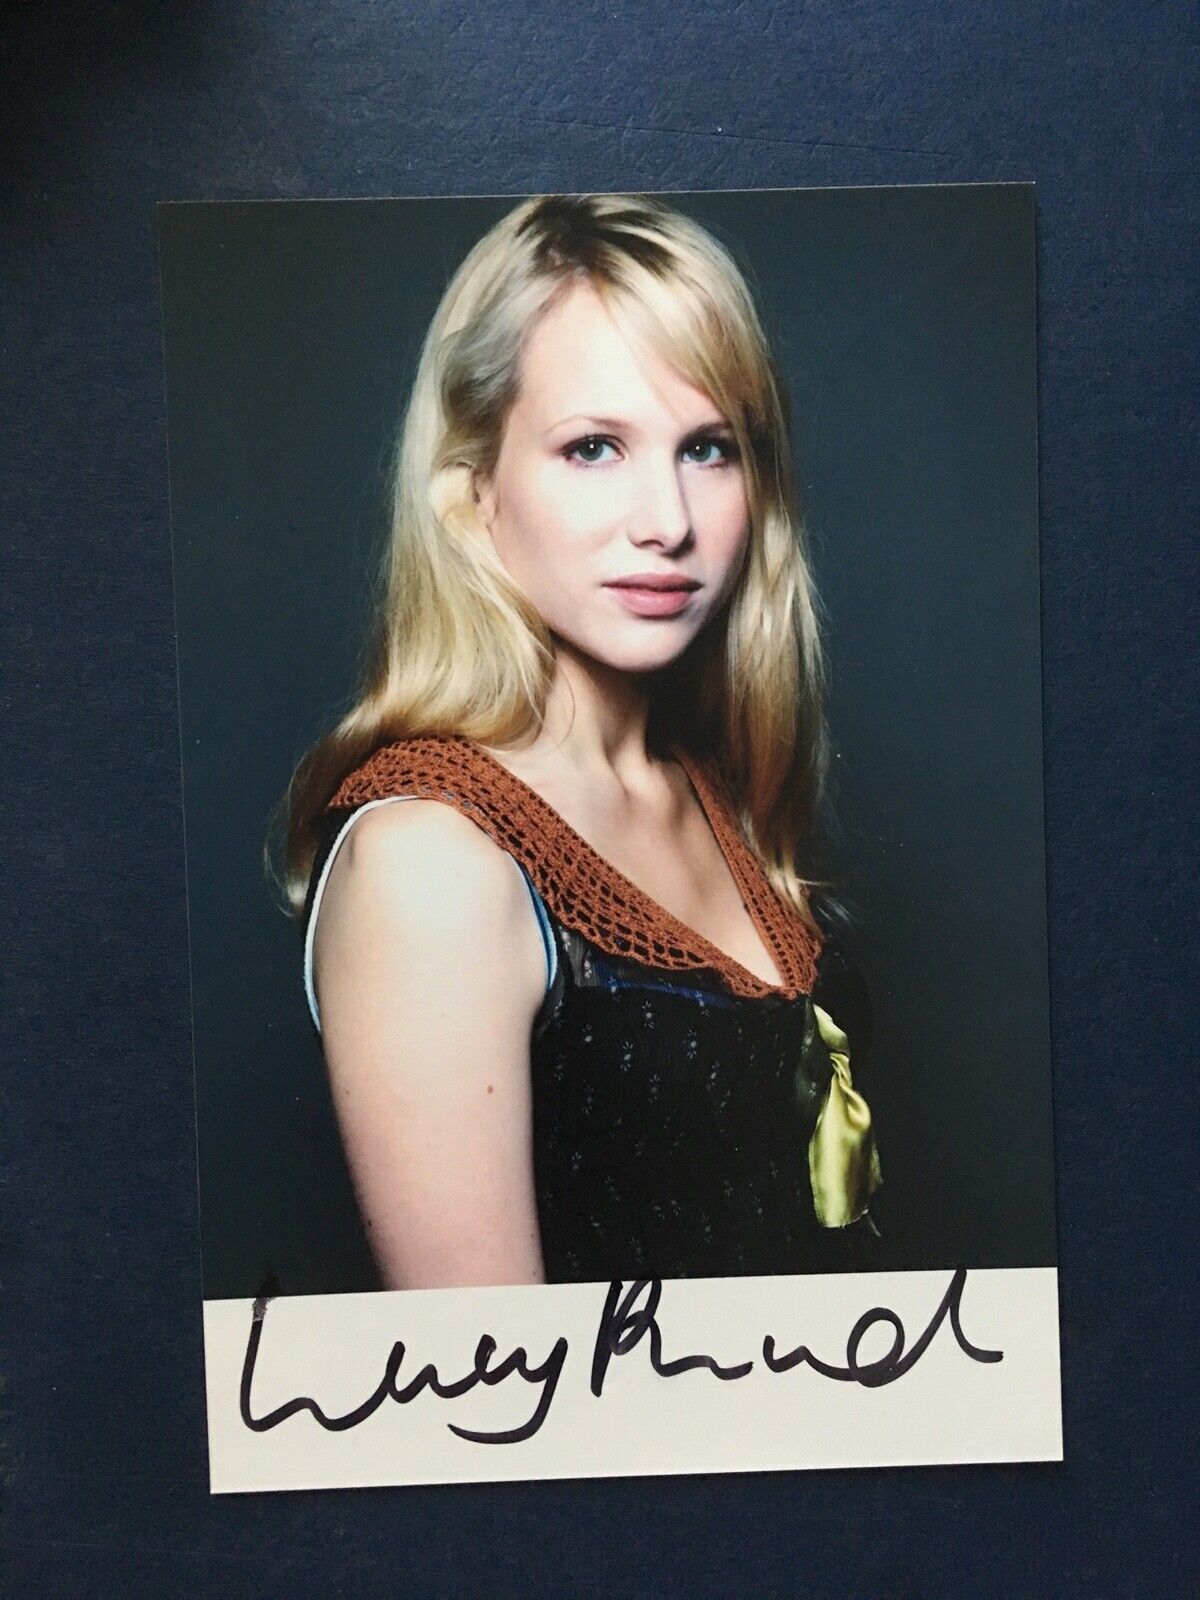 LUCY PUNCH - POPULAR BRITISH ACTRESS - HOT FUZZ - EXCELLENT SIGNED Photo Poster painting